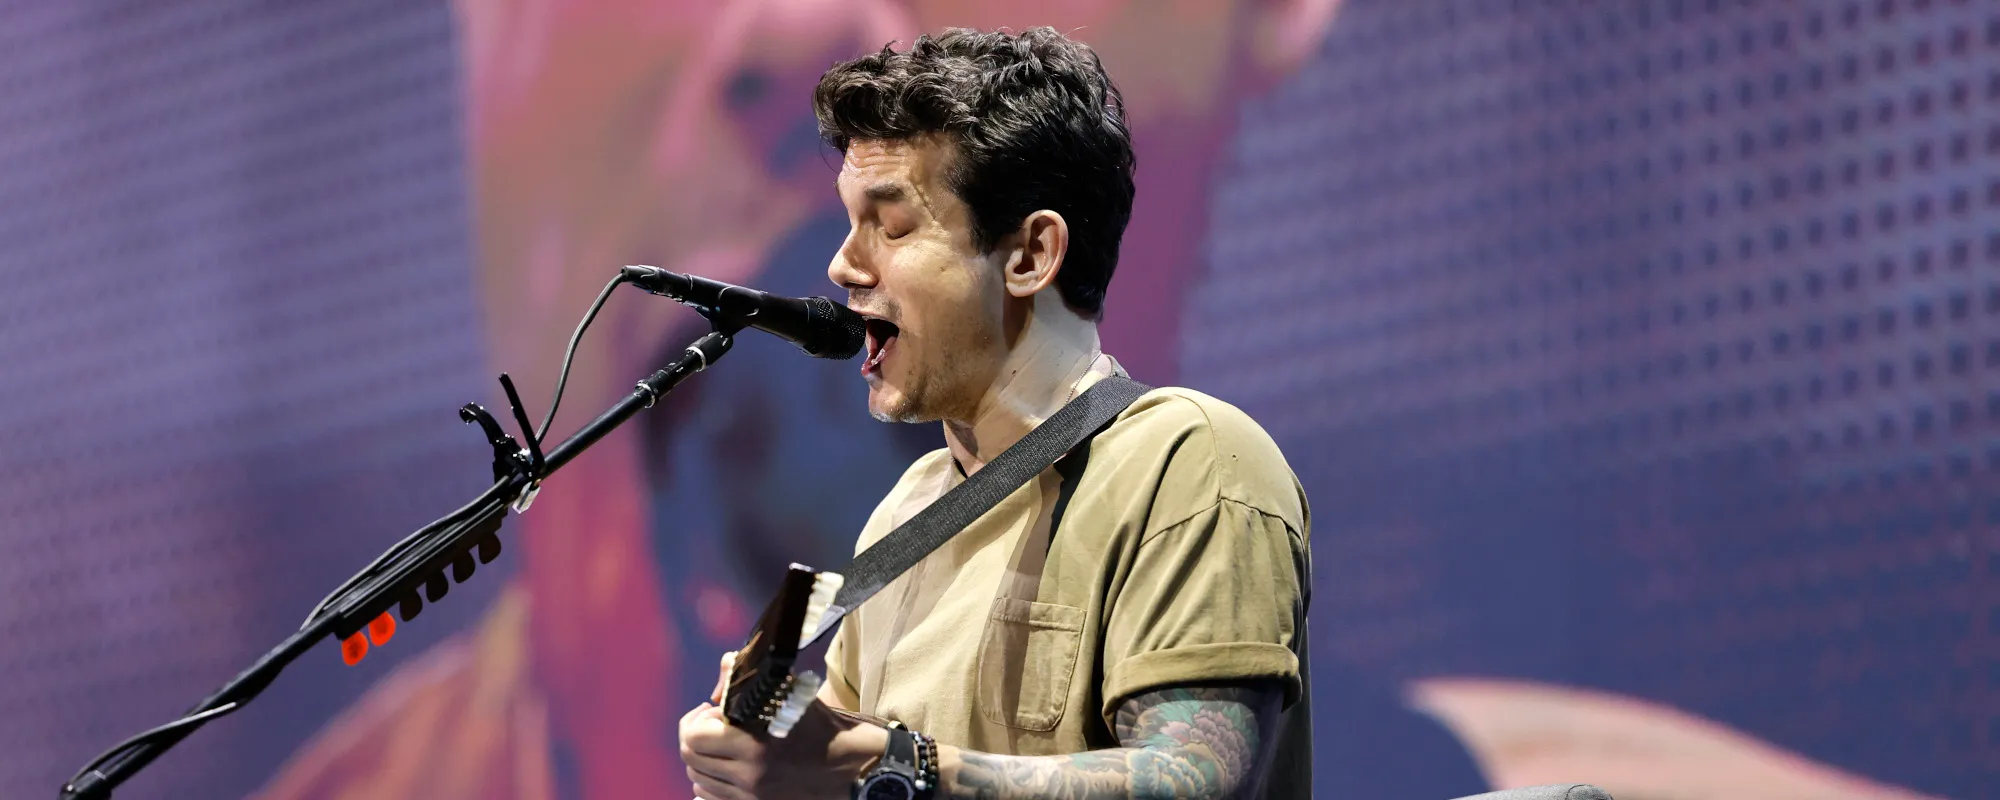 The Meaning Behind “New Light” by John Mayer and the Novel Marketing Campaign that Helped Make Its Album a Hit